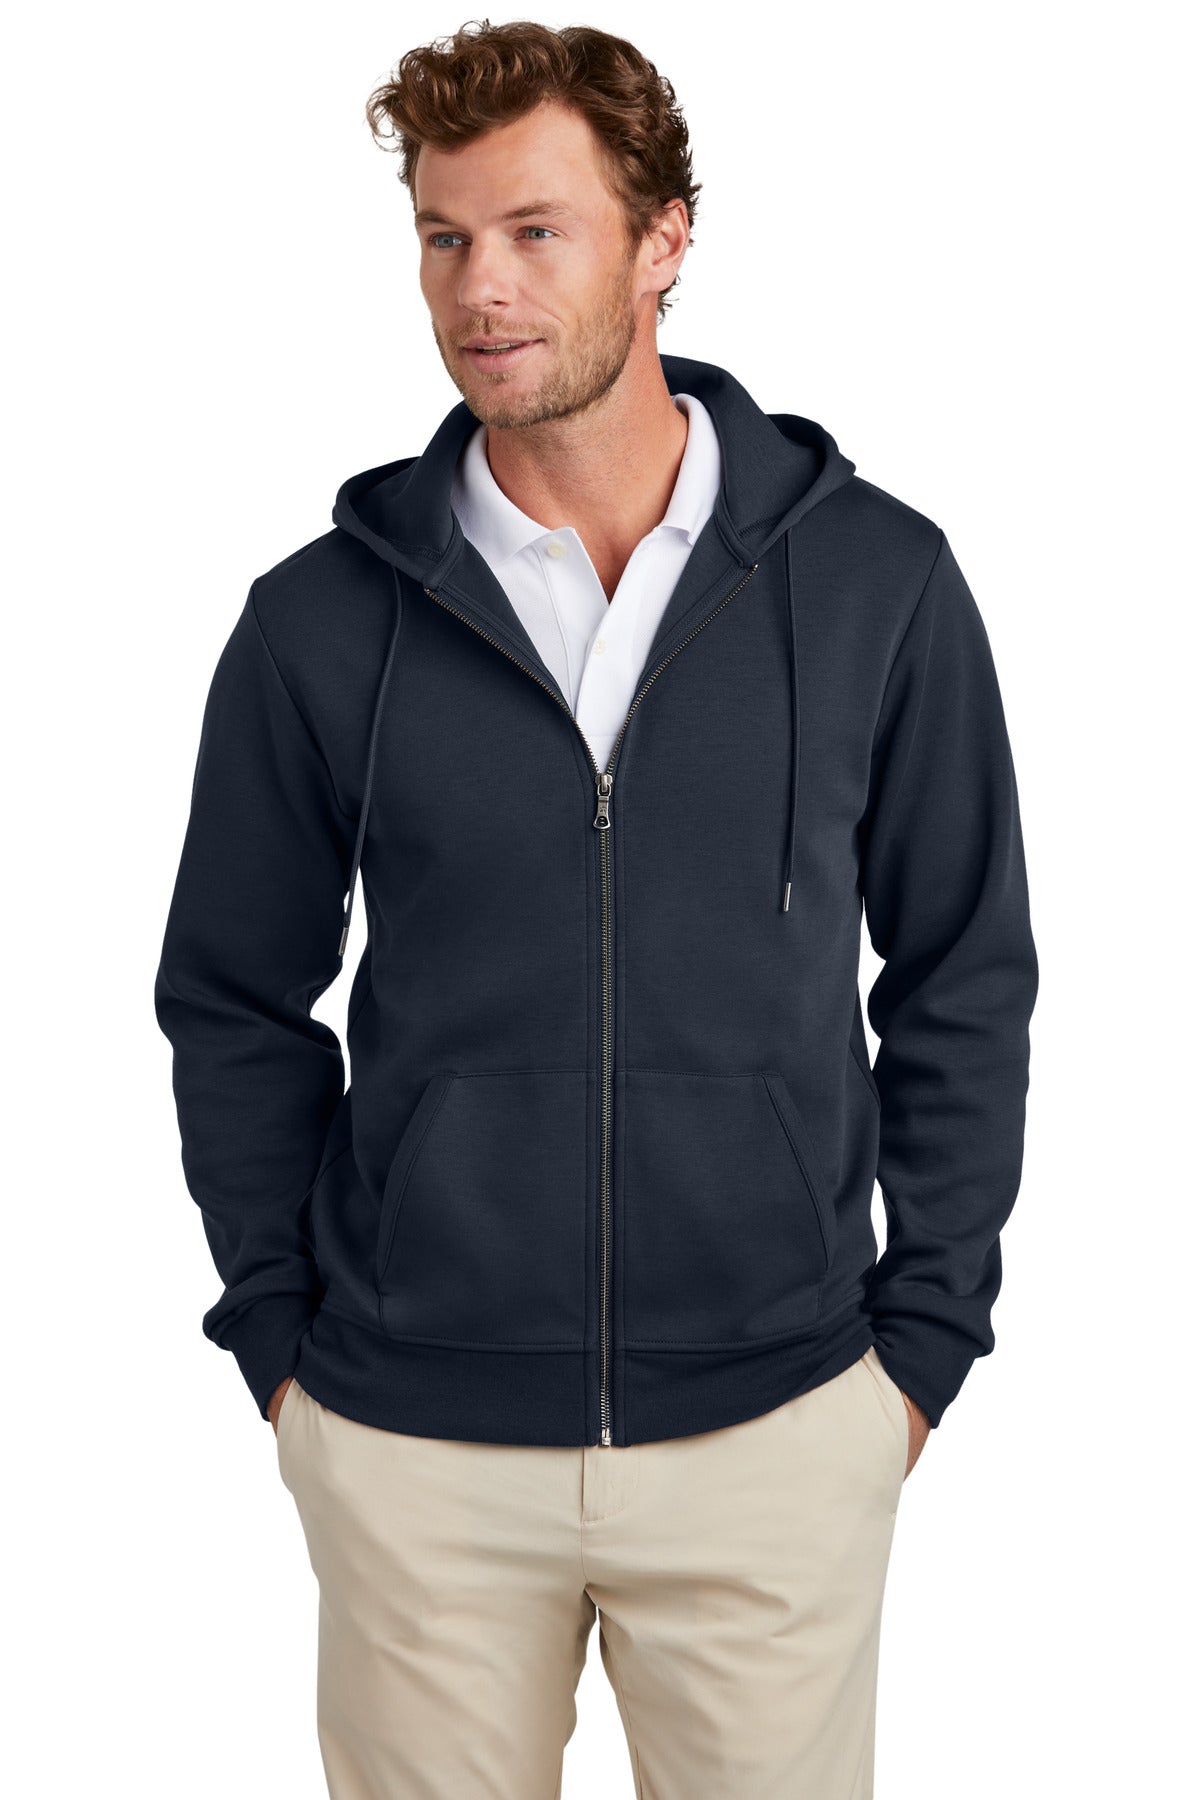 Brooks Brothers® Double-Knit Full-Zip Hoodie BB18208